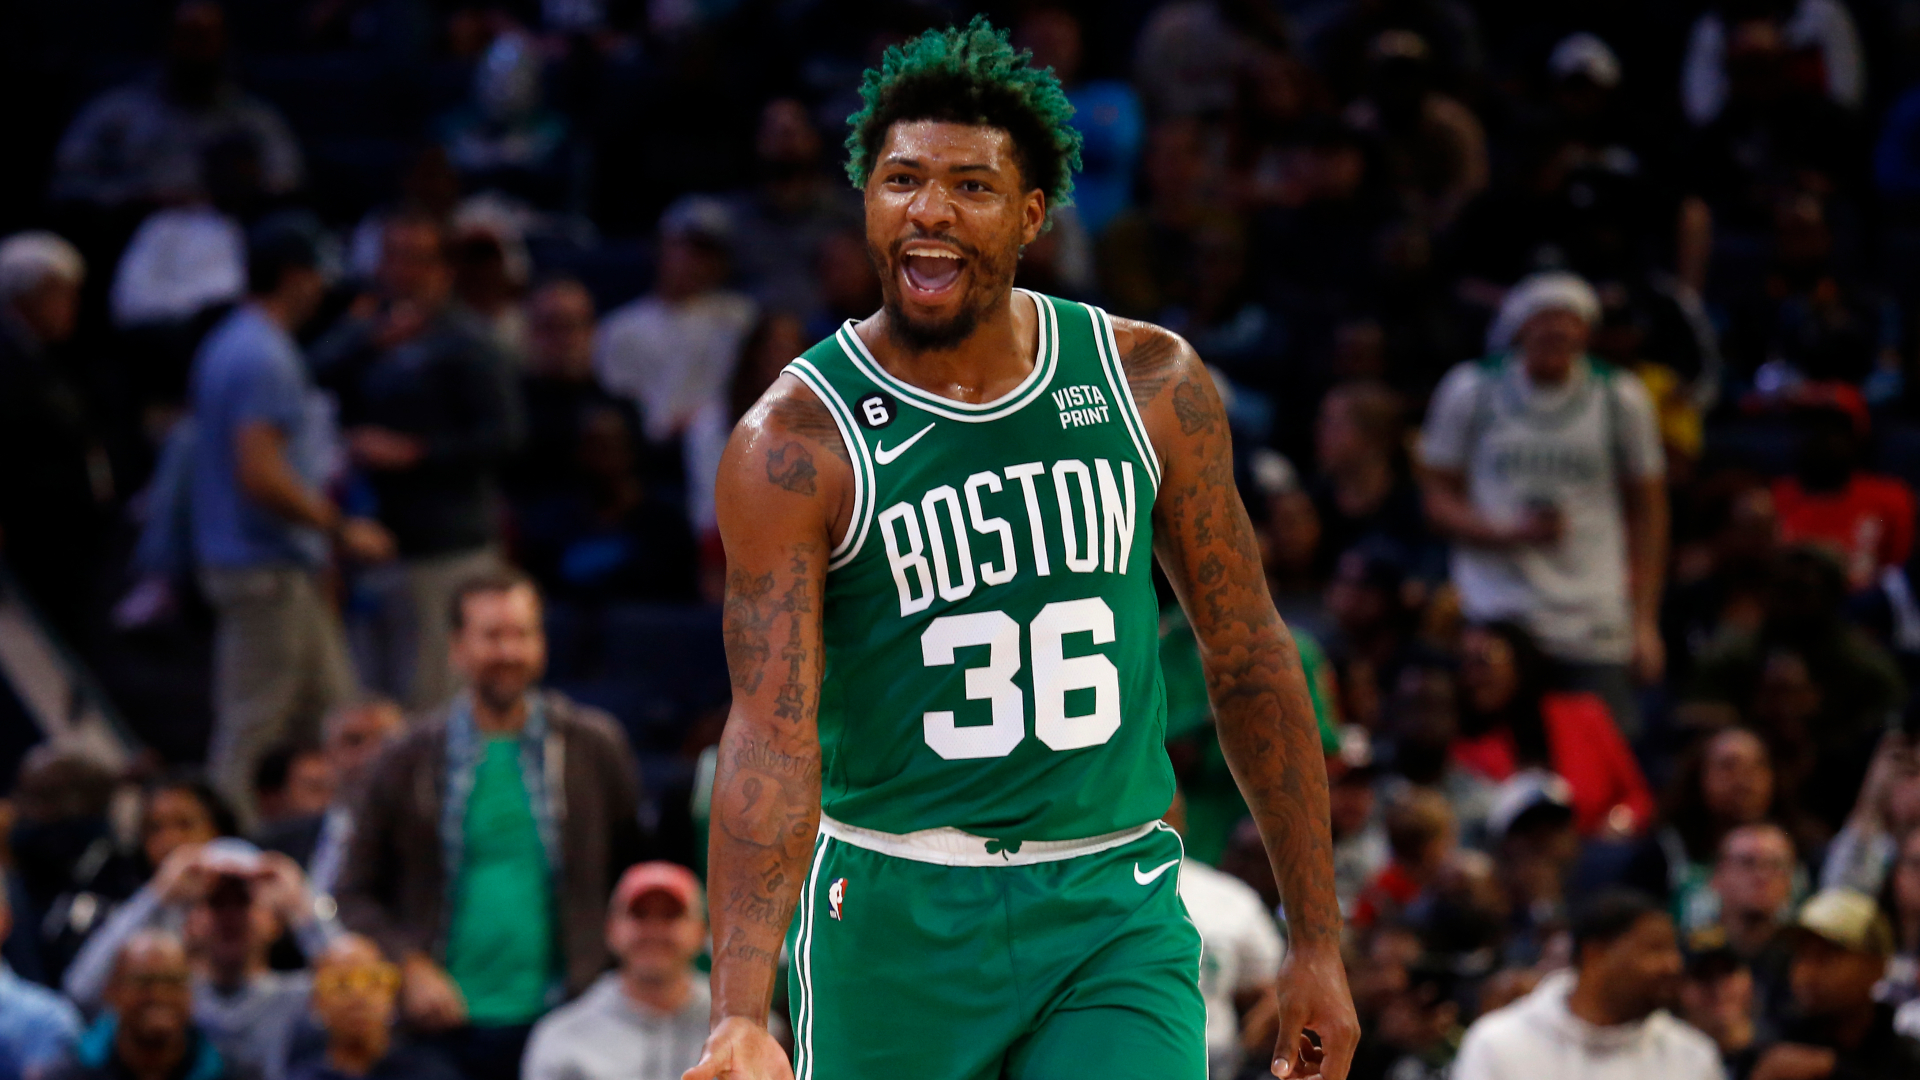 Marcus Smart Has 'All Love' For Celtics Fans After 'Tough' Trade